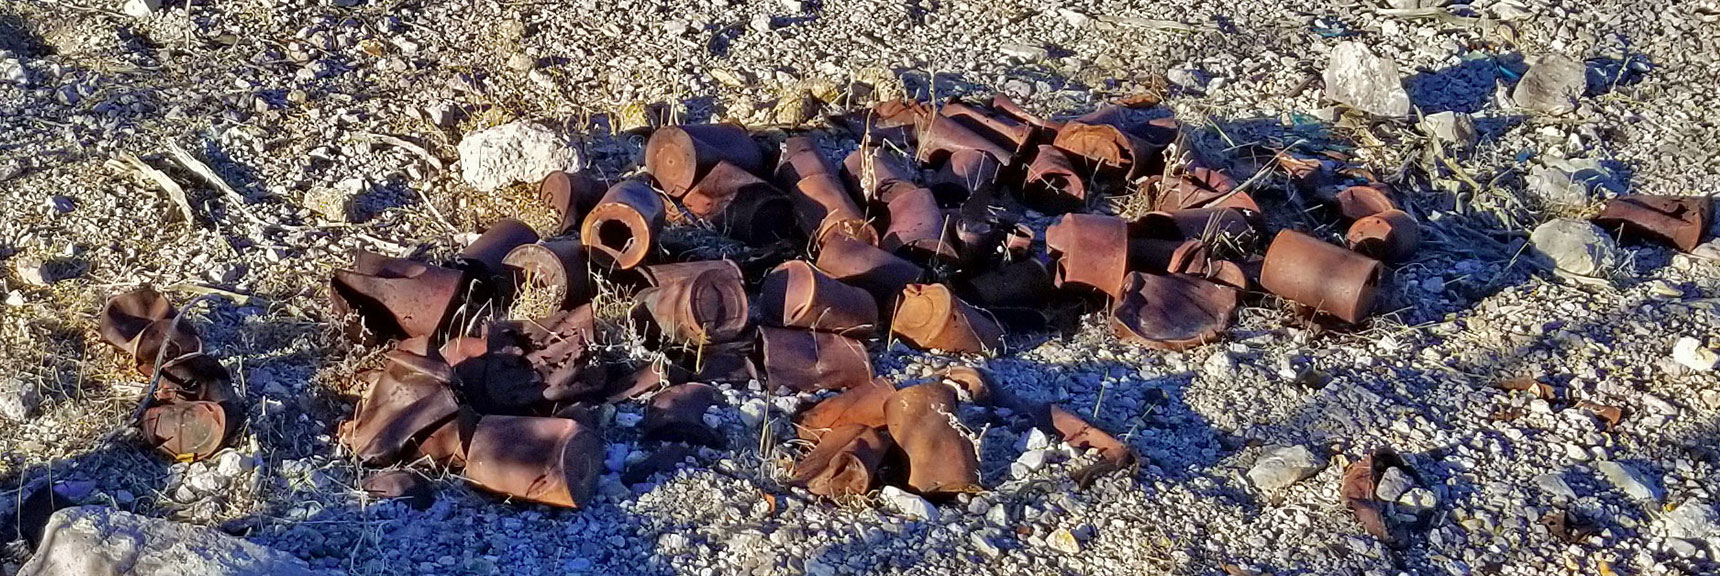 Many Scattered Rusty Cans. No City Sanitation Department? | Rhyolite Ghost Town | Death Valley Area, Nevada